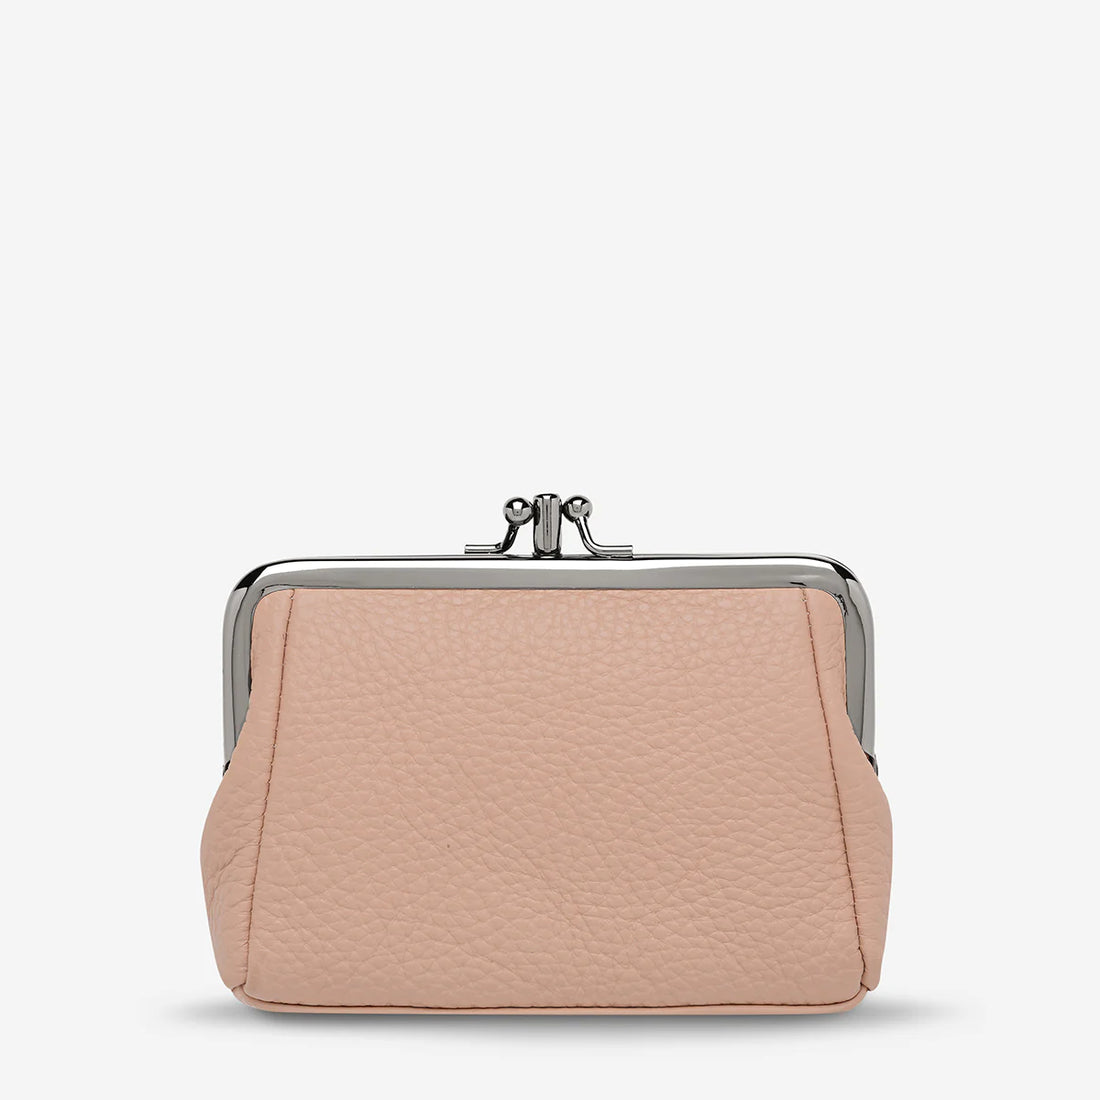 Volatile Leather Purse - Dusty Pink